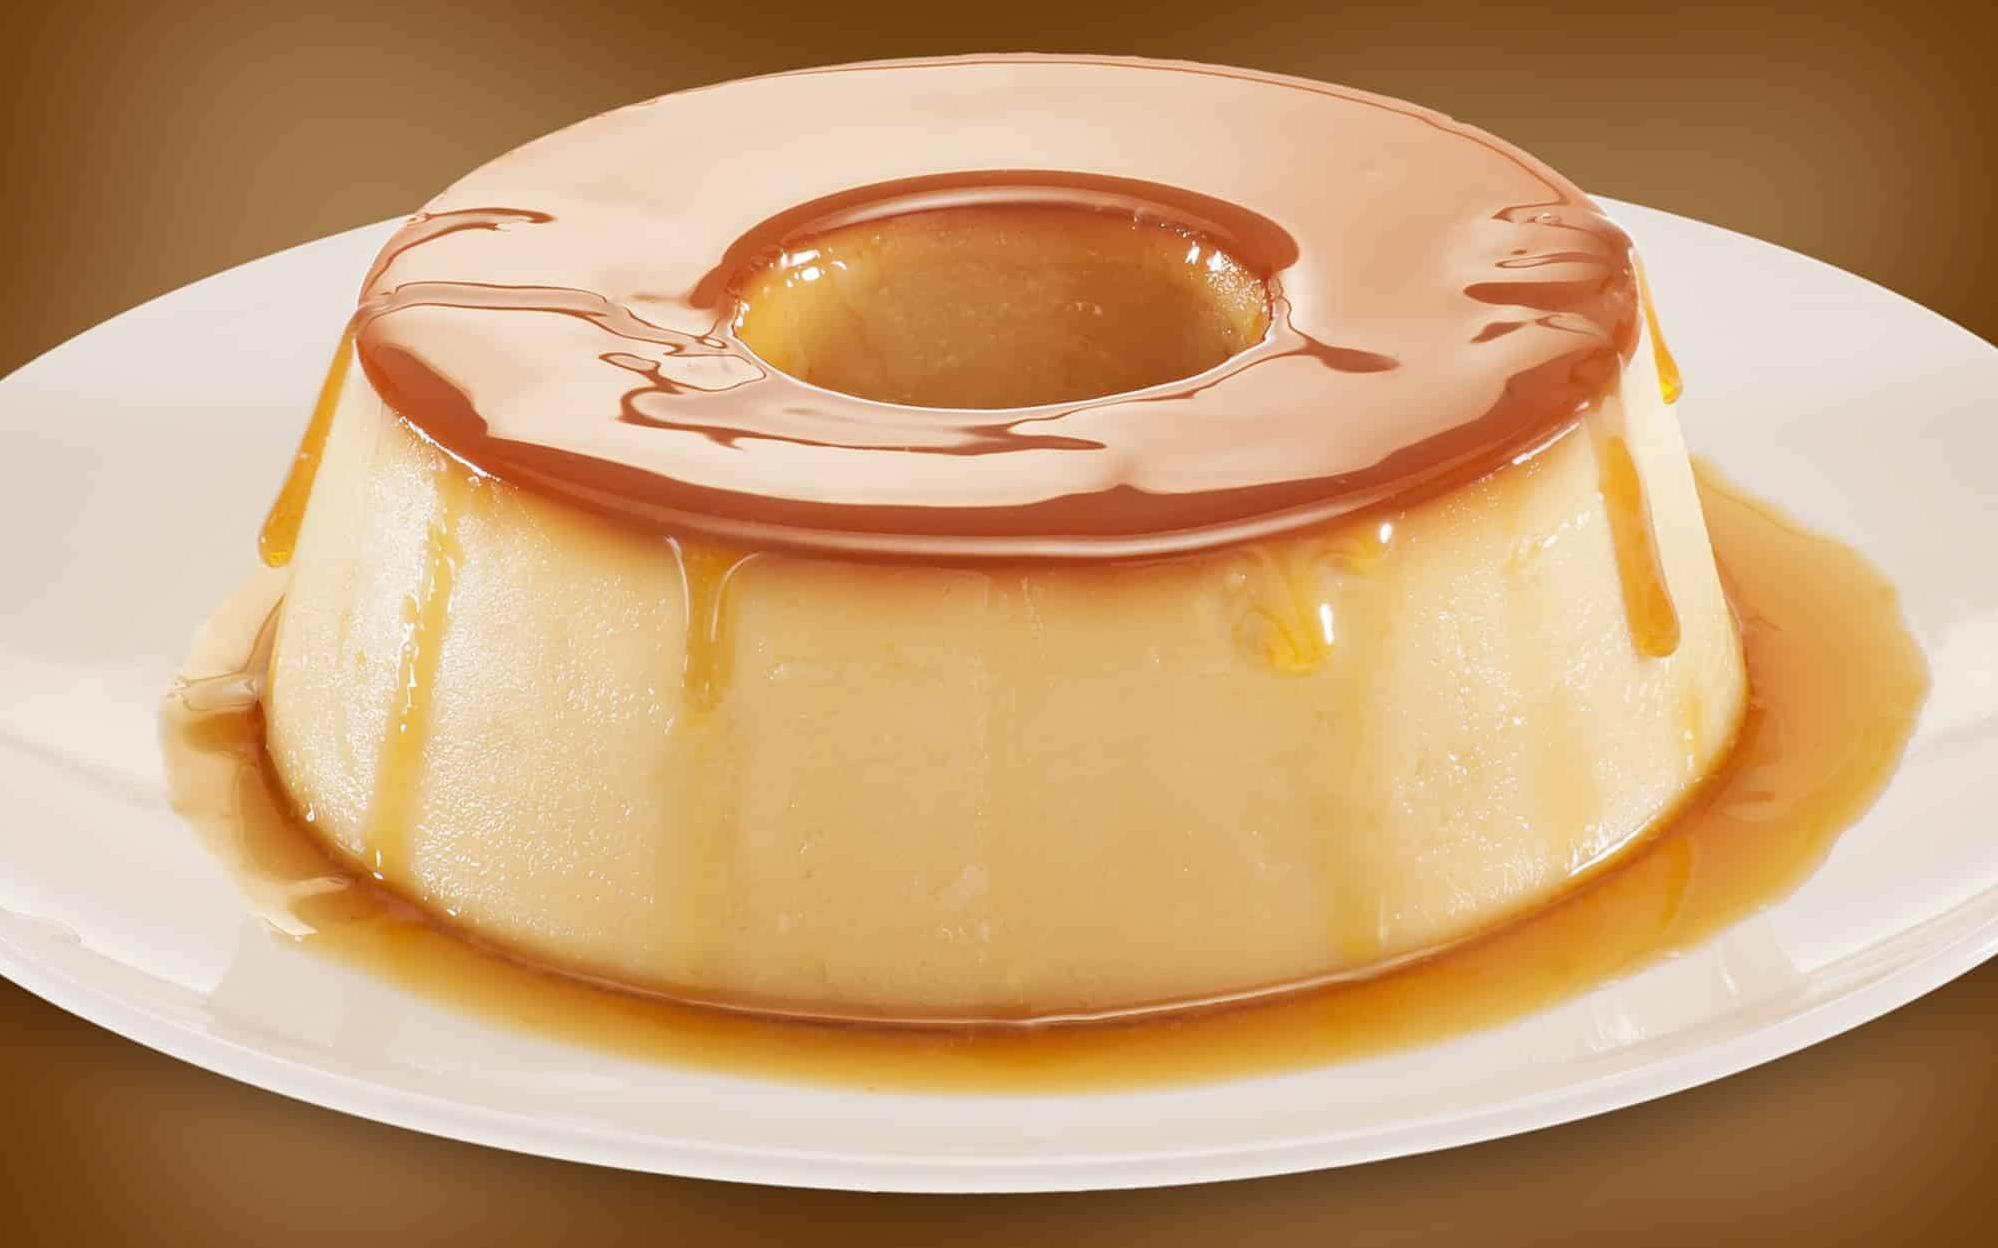  Creamy and sweet Brazilian milk pudding, known as Pudim de Leite, is a classic and delicious dessert.